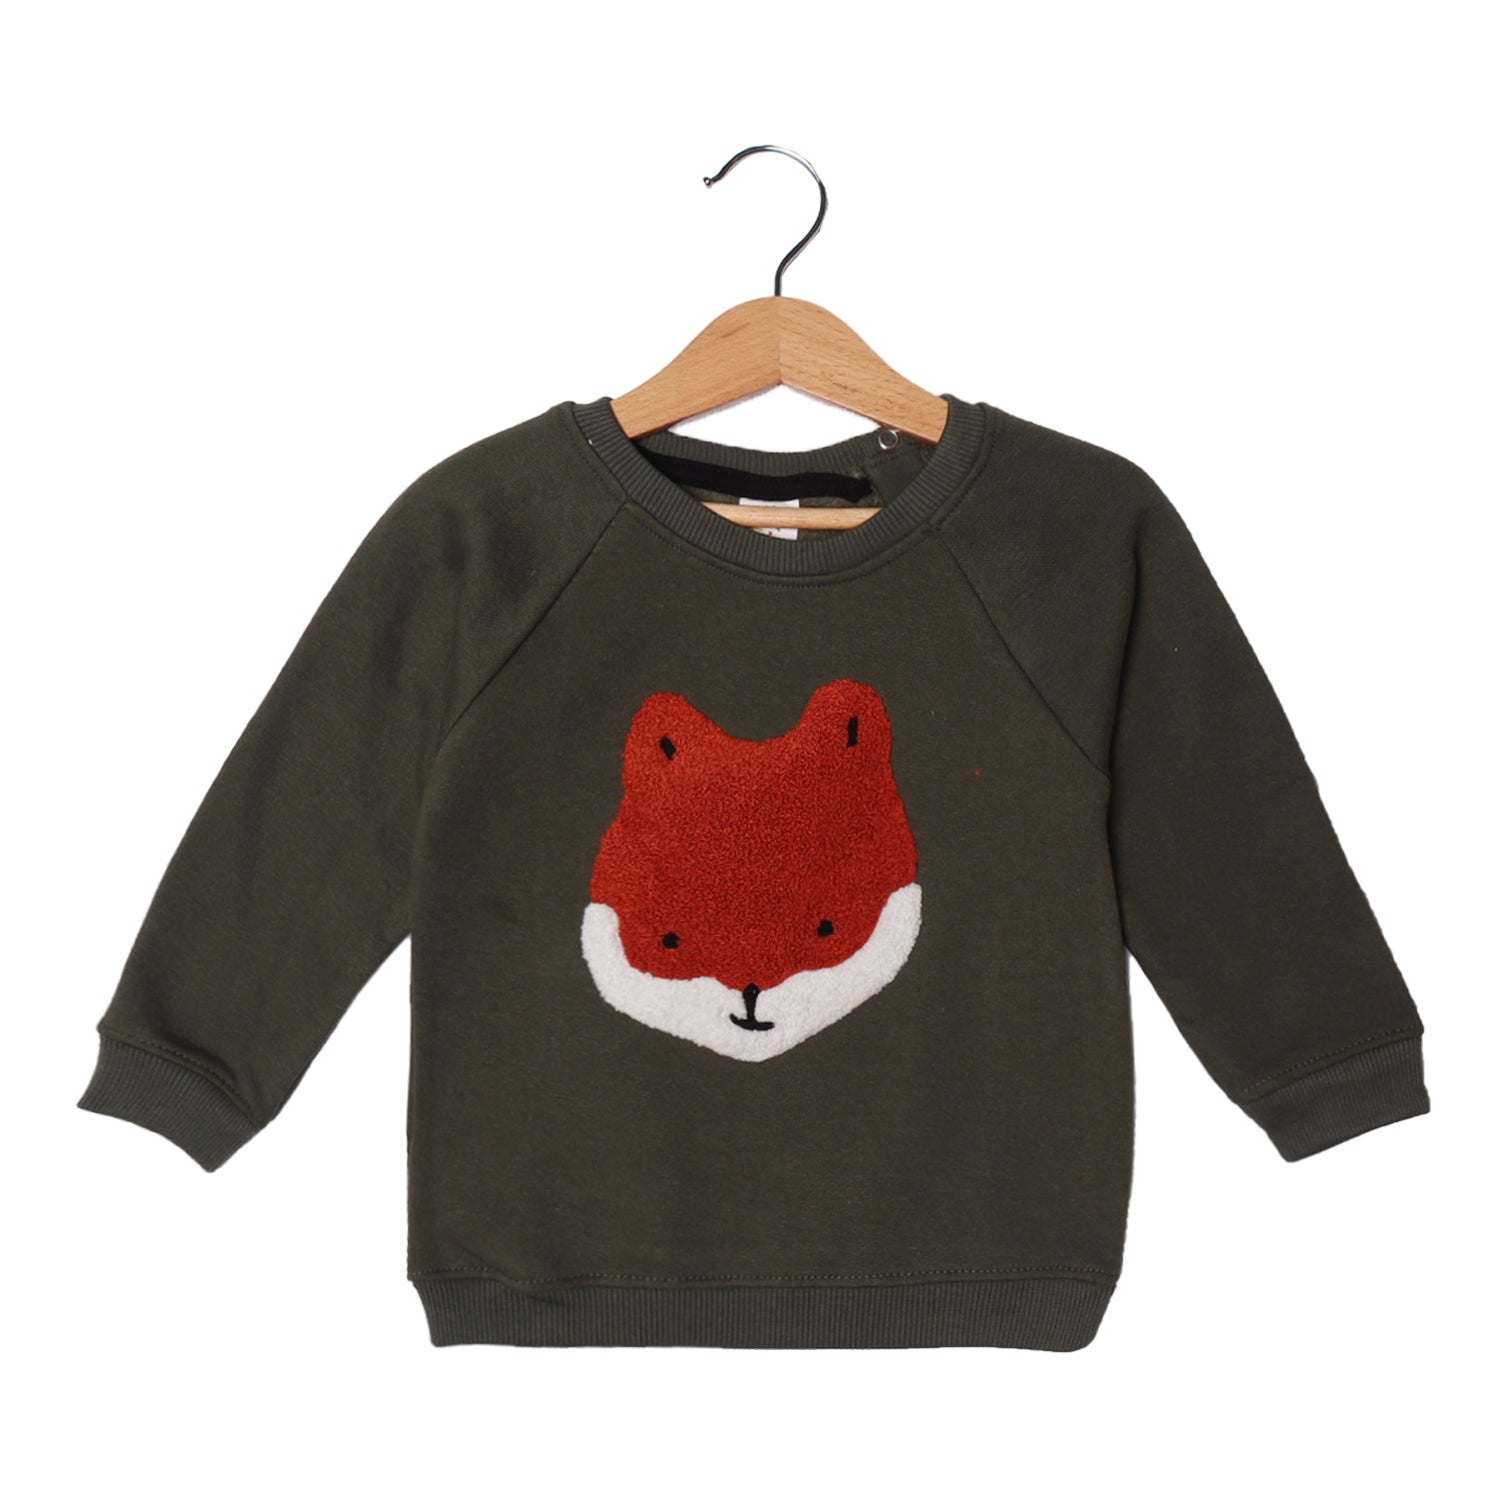 GREEN FOX FACE EMBROIDERED SWEATSHIRT FOR BOYS